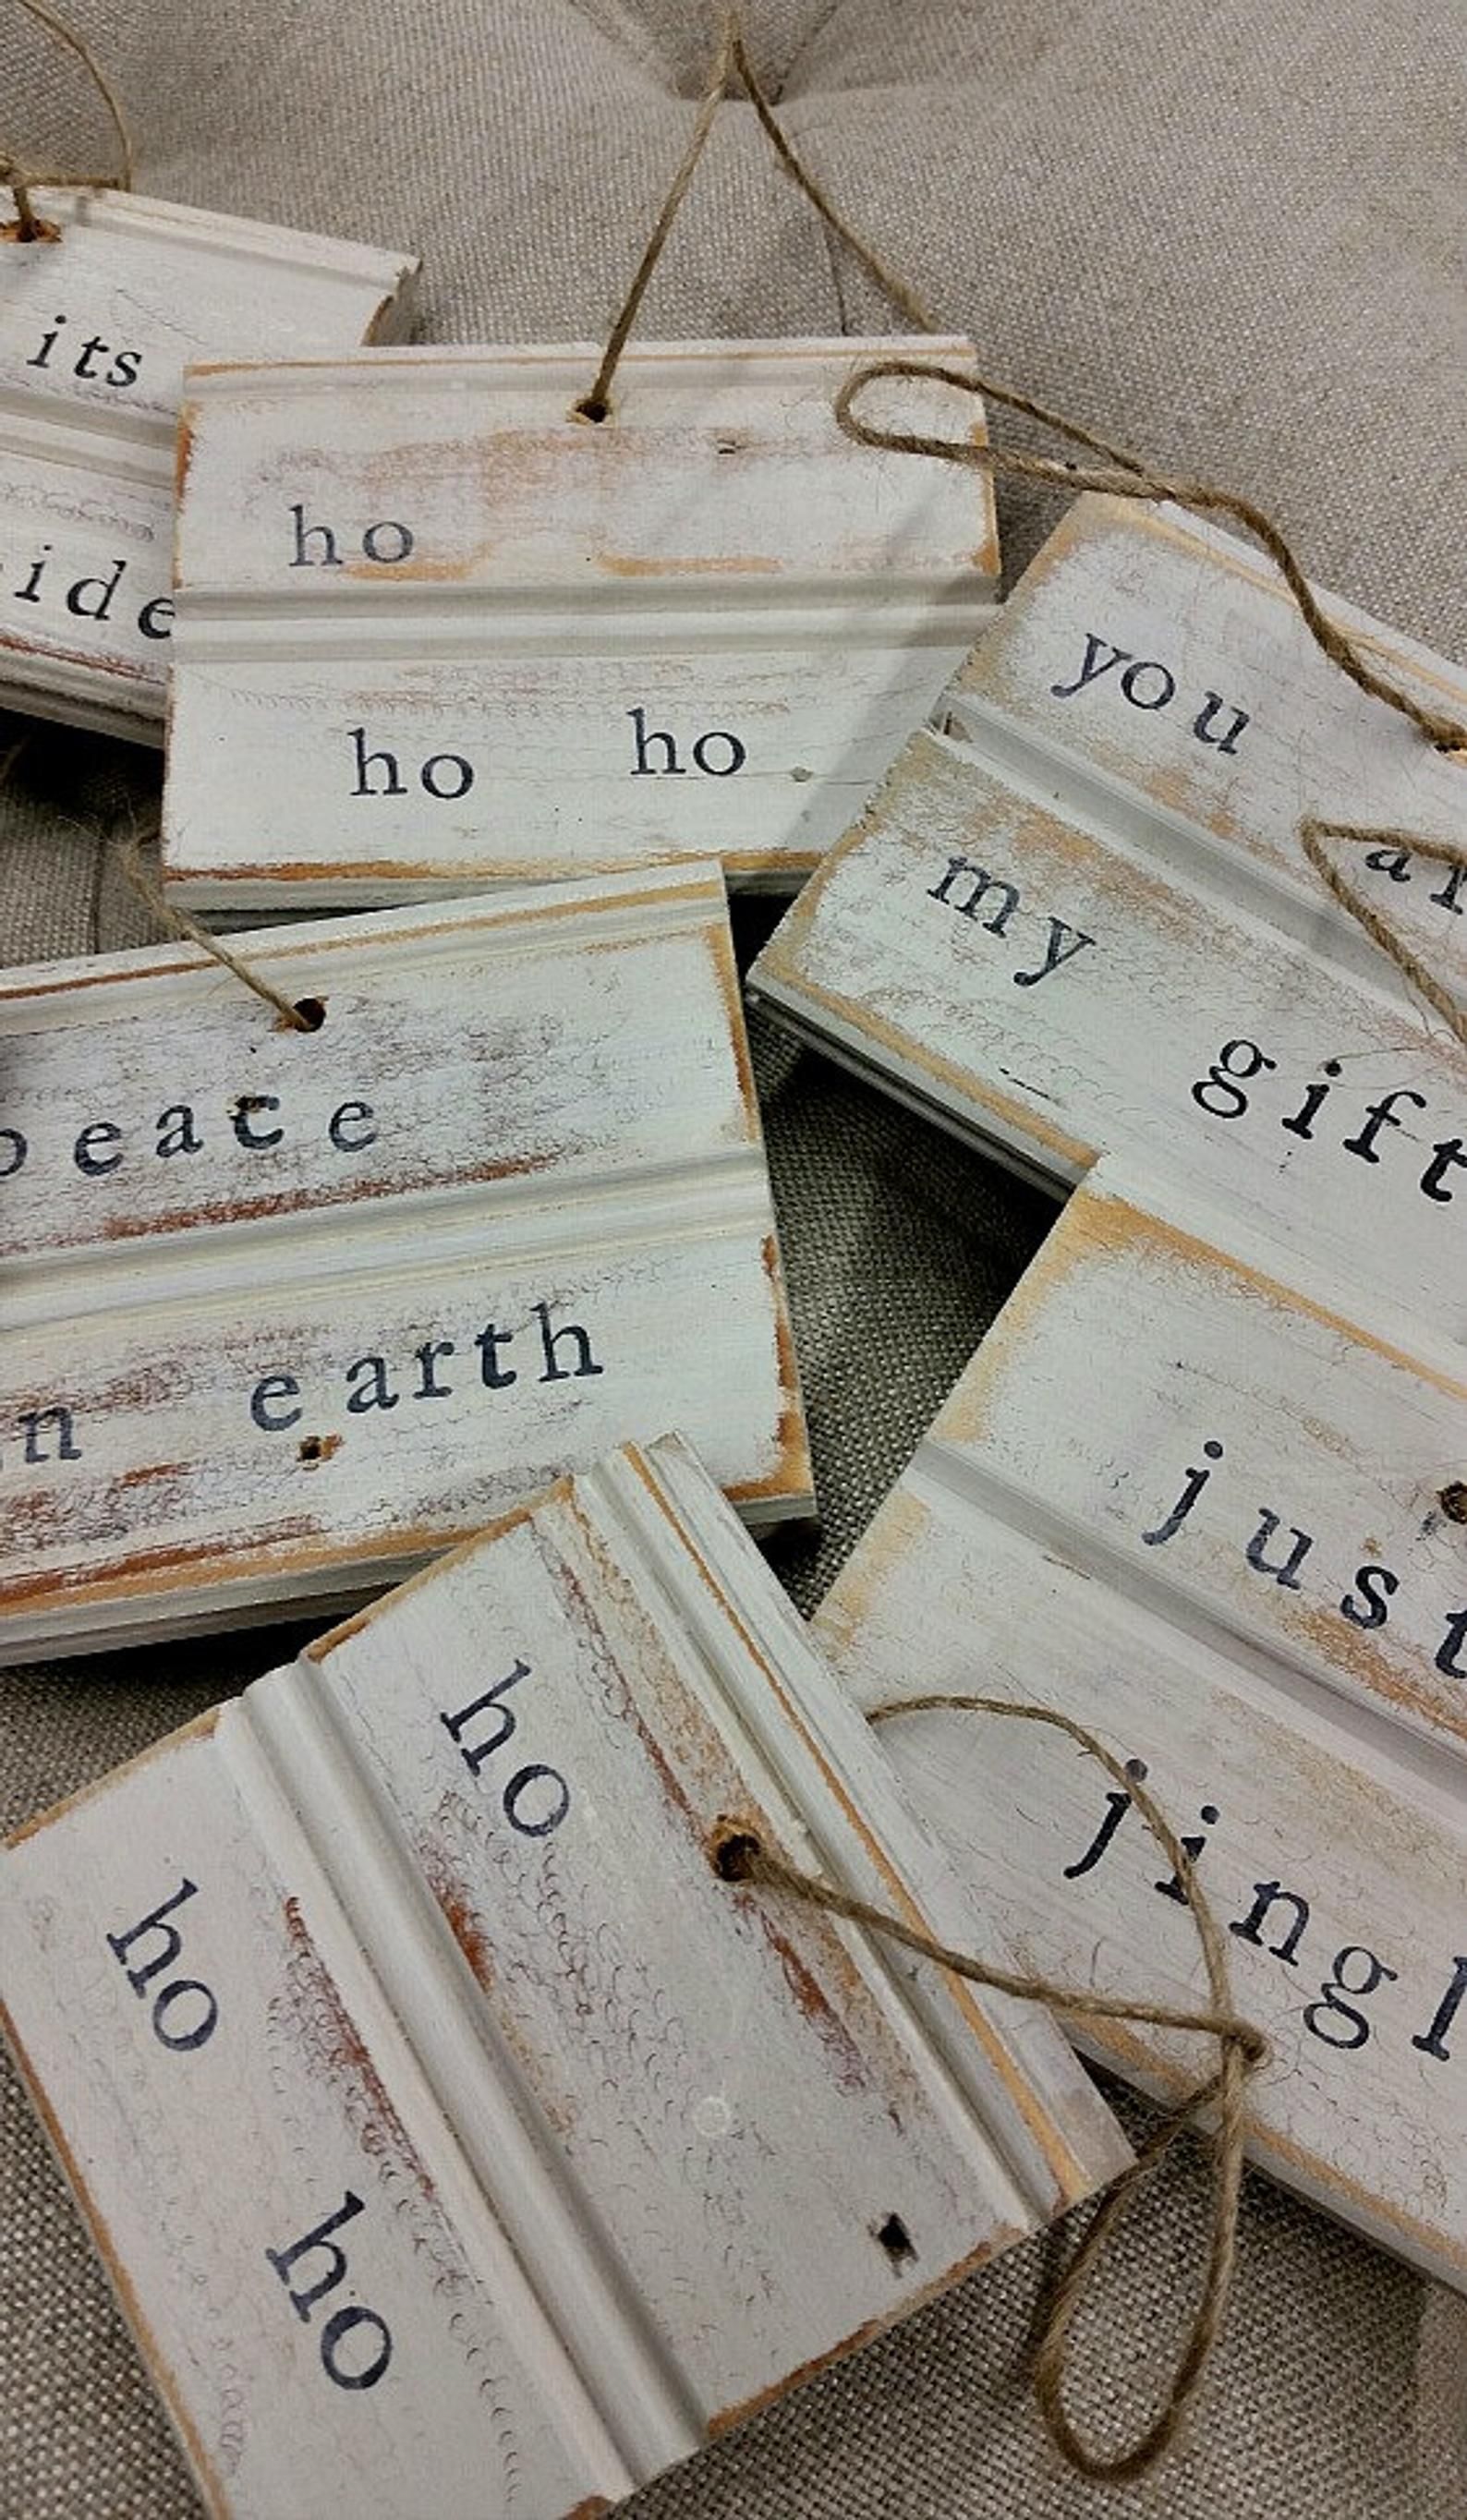 Reclaimed Wood Beadboard Christmas Ornaments Or Gift Tags - Hand Stamped with saying - Reclaimed Wood Beadboard Christmas Ornaments Or Gift Tags - Hand Stamped with saying -   diy Christmas ornaments